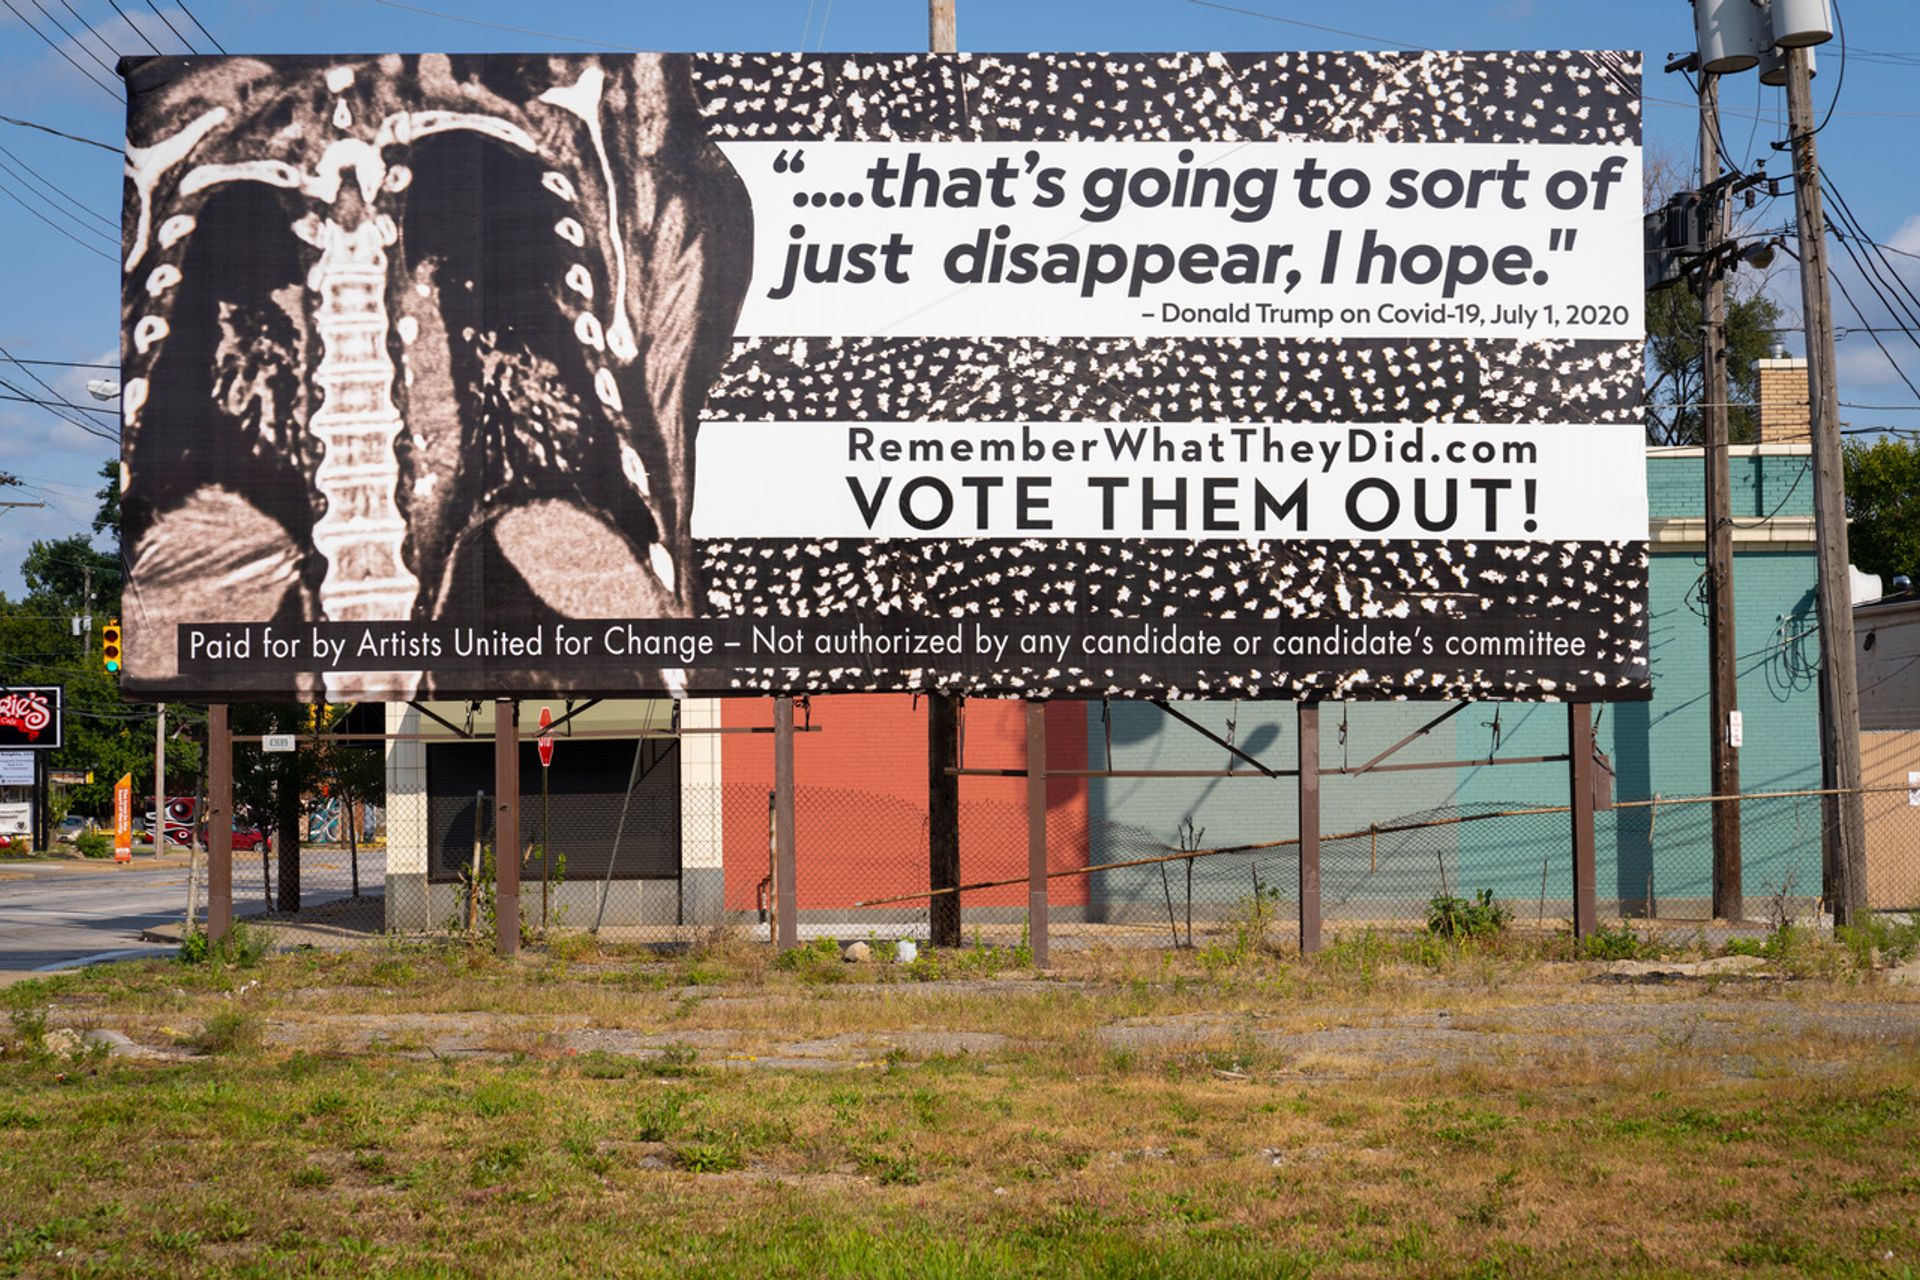 Nate Lewis, a former nurse who worked in a hospital ICU ward for nine years, chose to create a bold patterned piece around the phrase “Just disappear, I hope”—one of the US president’s cavalier remarks about the coronavirus at the start of the pandemic Photo: Bob Glick, courtesy of Artists United for Change